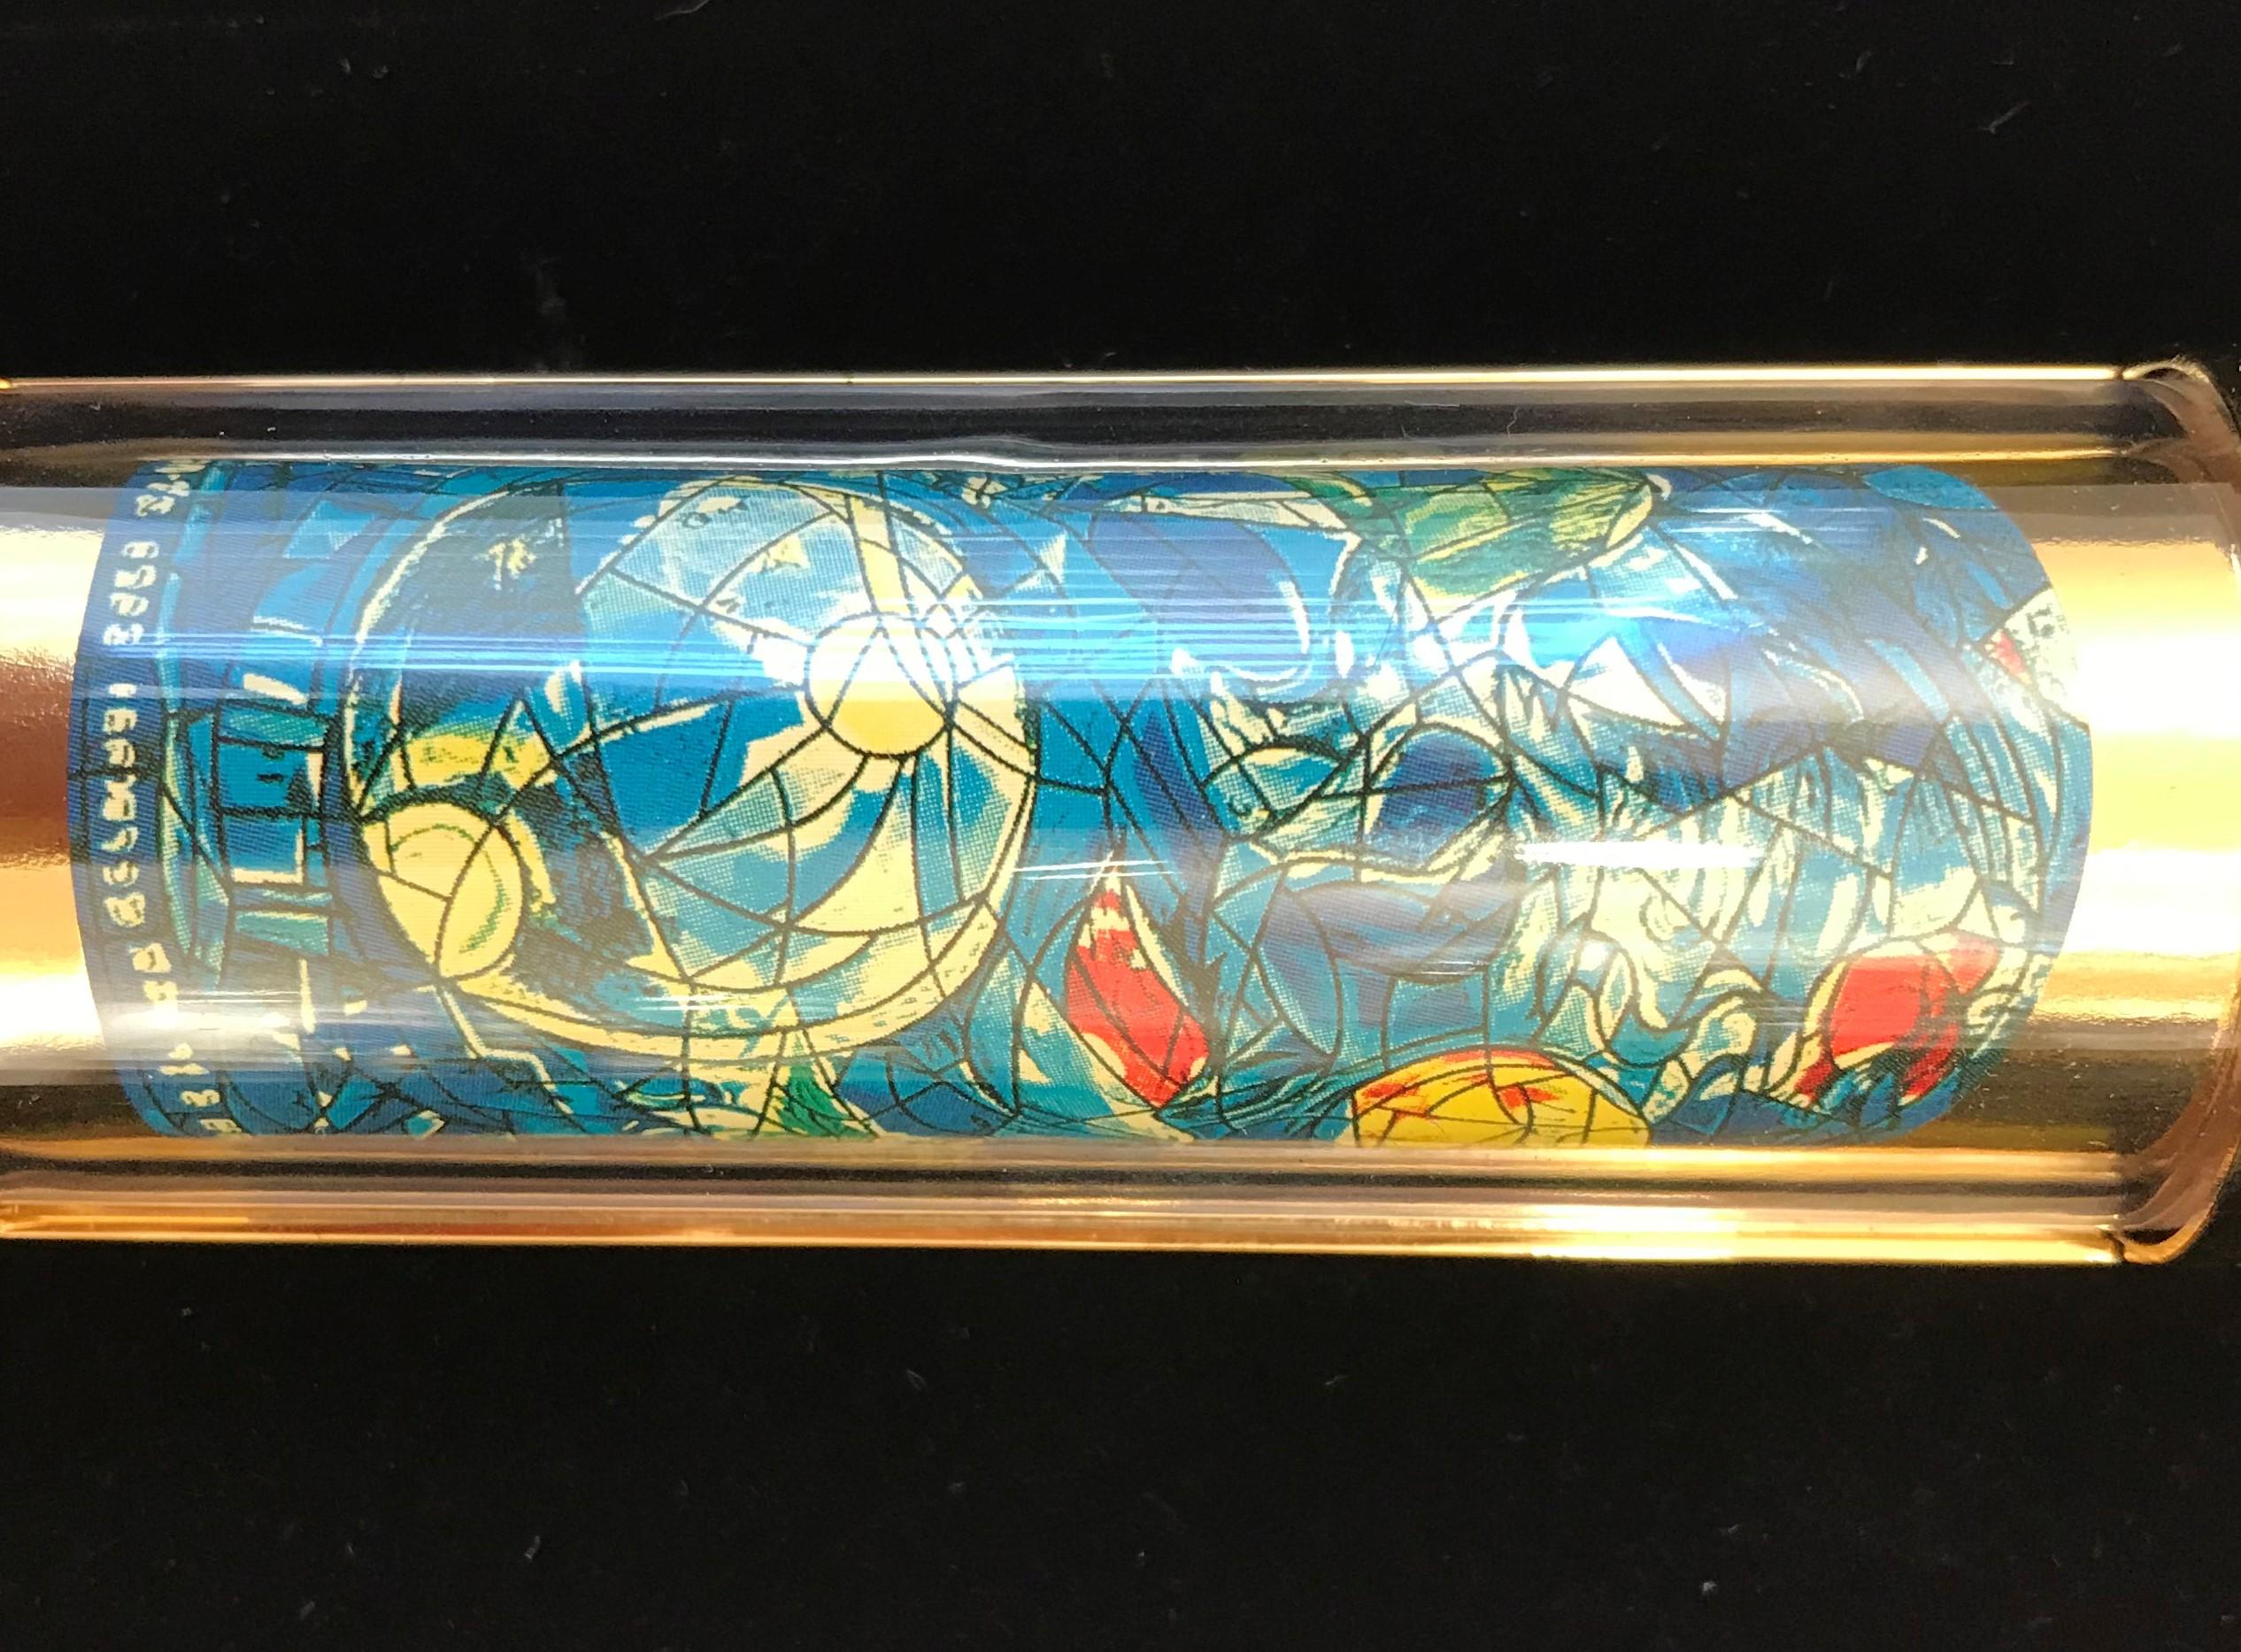 
The Chagall mezuzah collection is a limited edition art project celebrating the art of one of the most iconic Jewish artist in history. This edition, consists of 1,800 sets of 12 Mezuzah casings, one for each of the tribes of Israel.